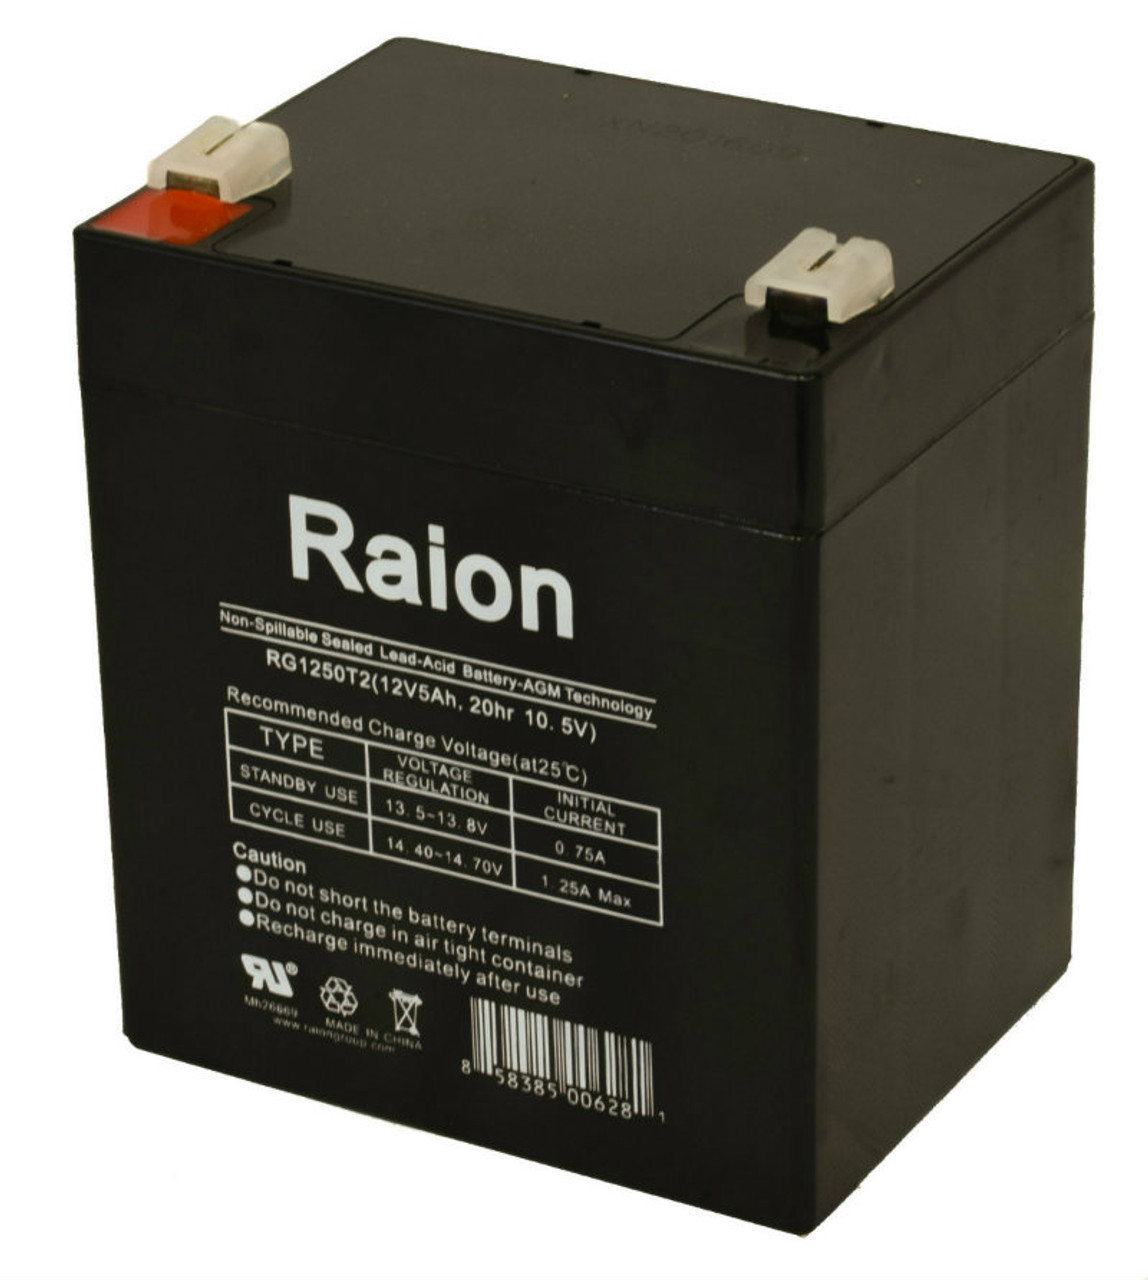 Raion Power RG1250T1 Replacement Emergency Light Battery for Silent Knight 5122